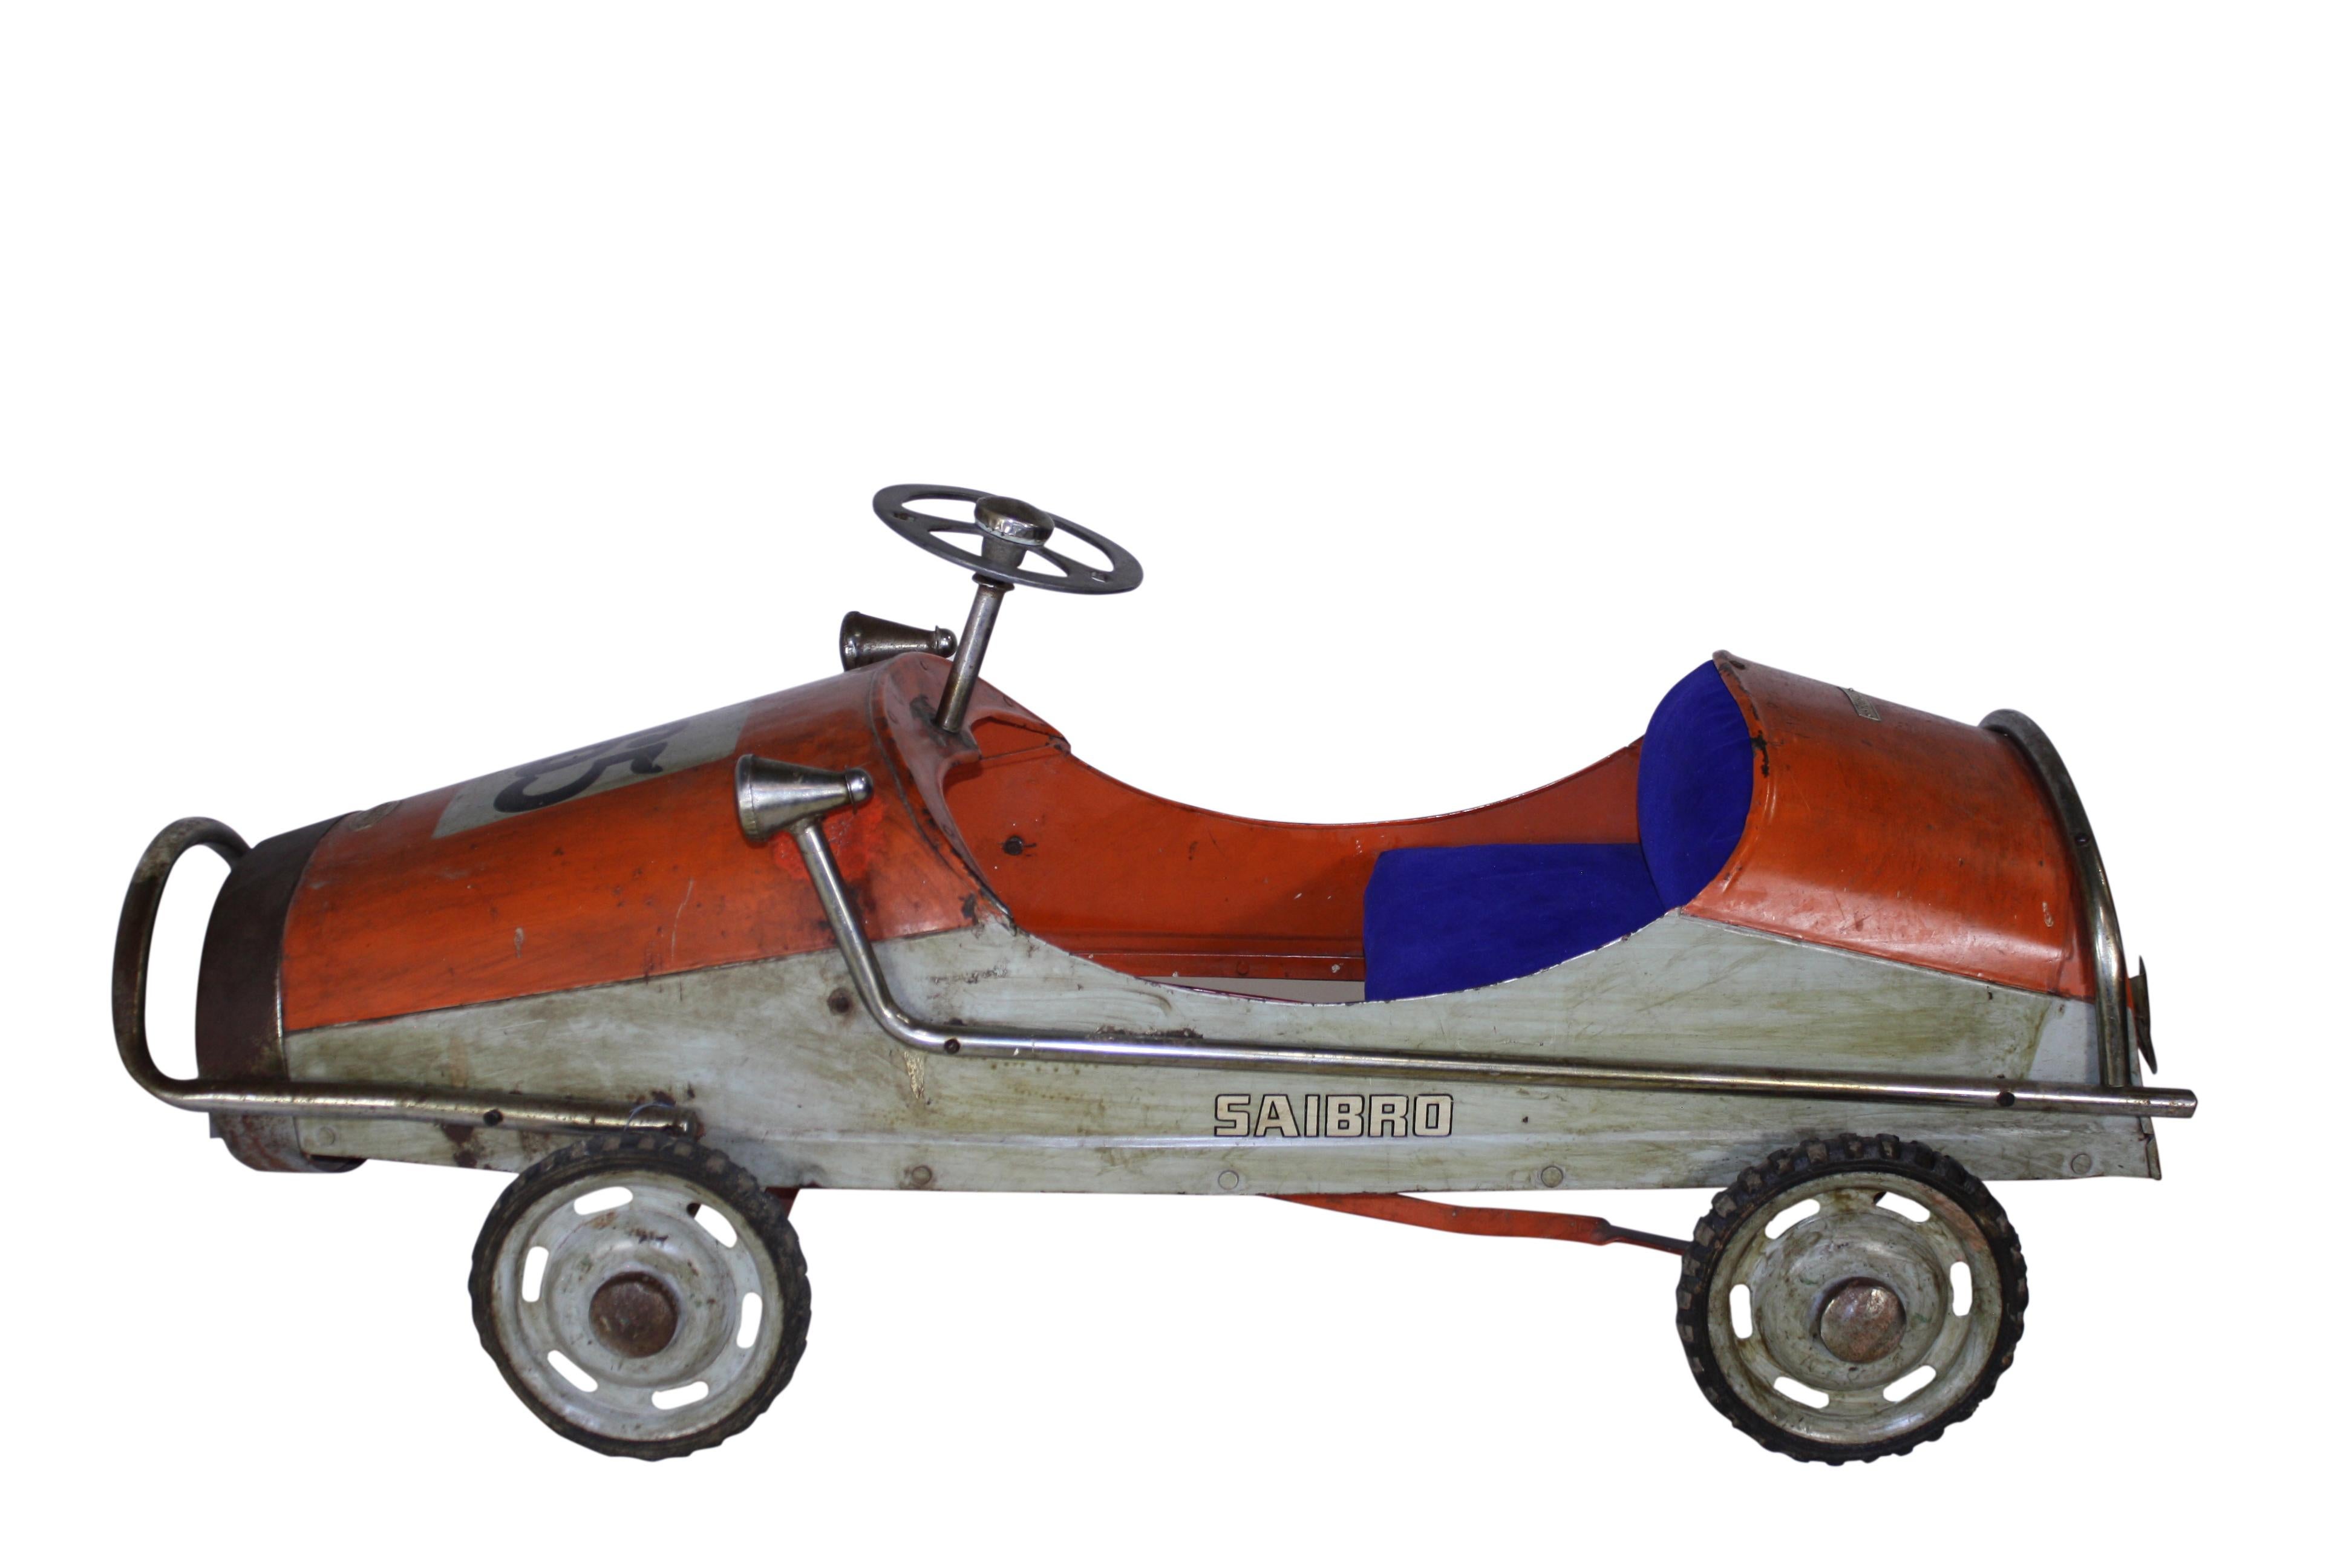 Sleek and sporty, this mid-20th century pedal car by Saibro features a mesh grille, padded seat, rubber tires, and proudly wears #165.

 